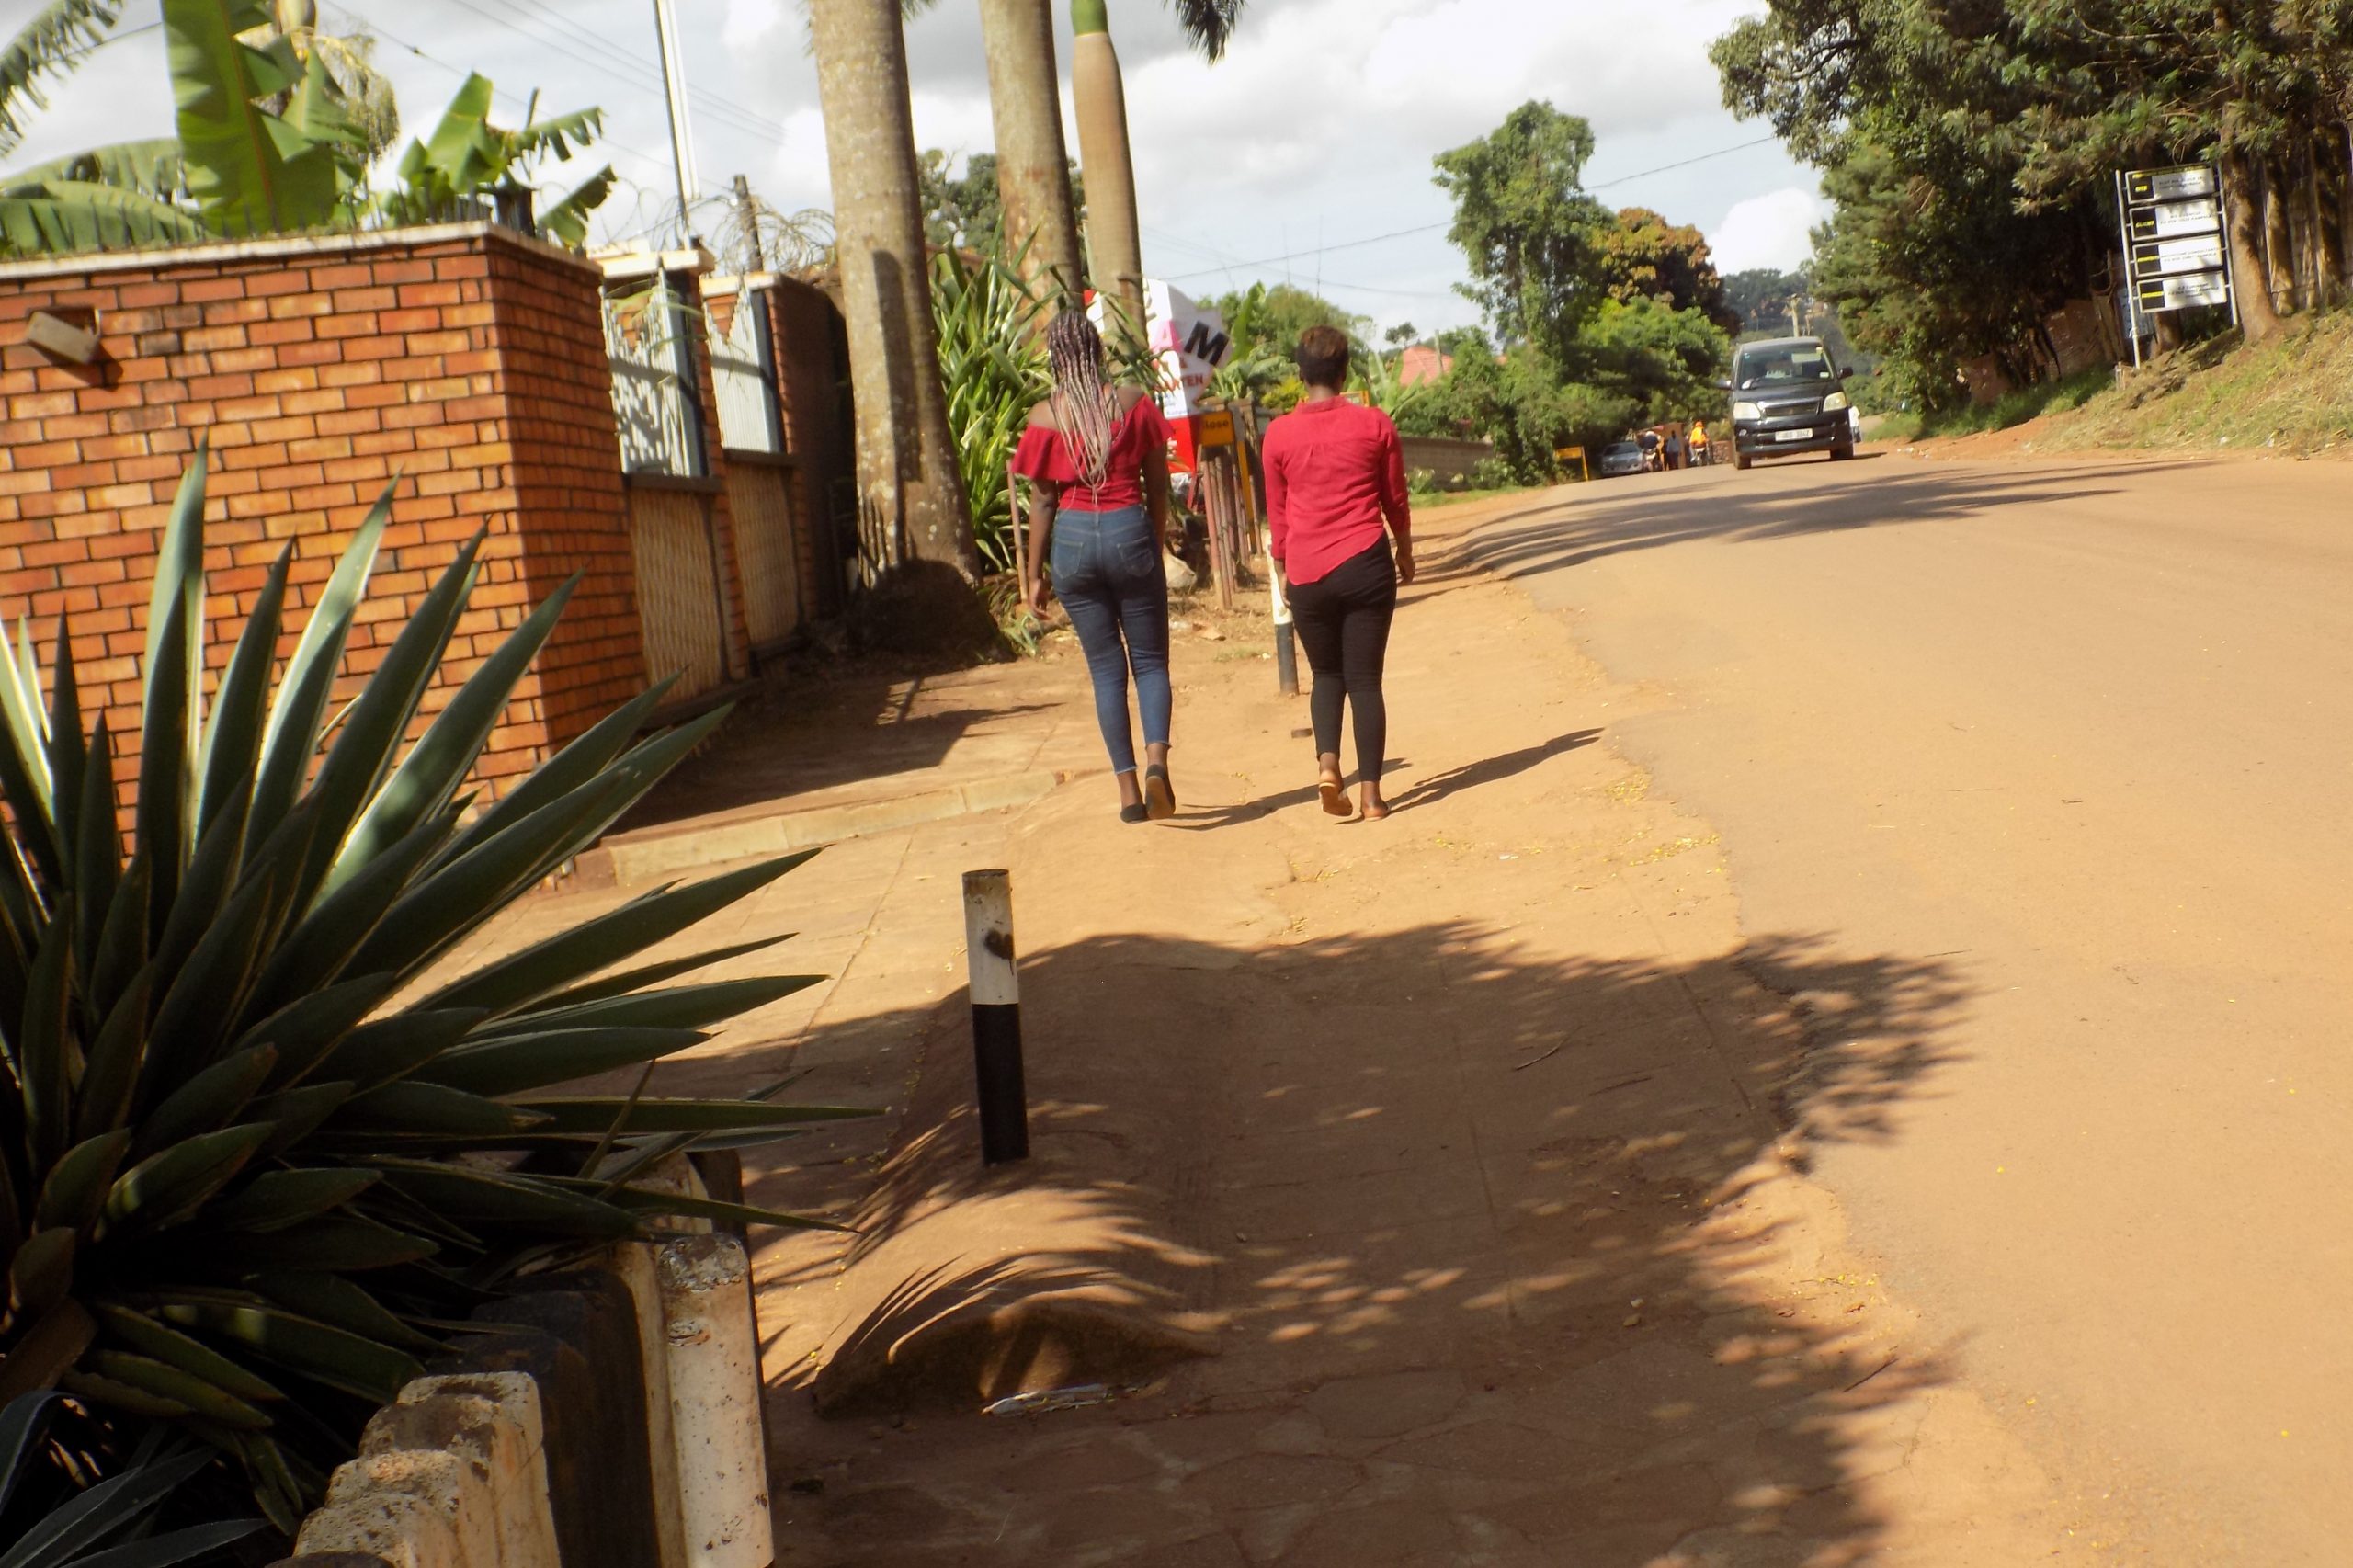 Kampala slay queens on hooves over COVID-19